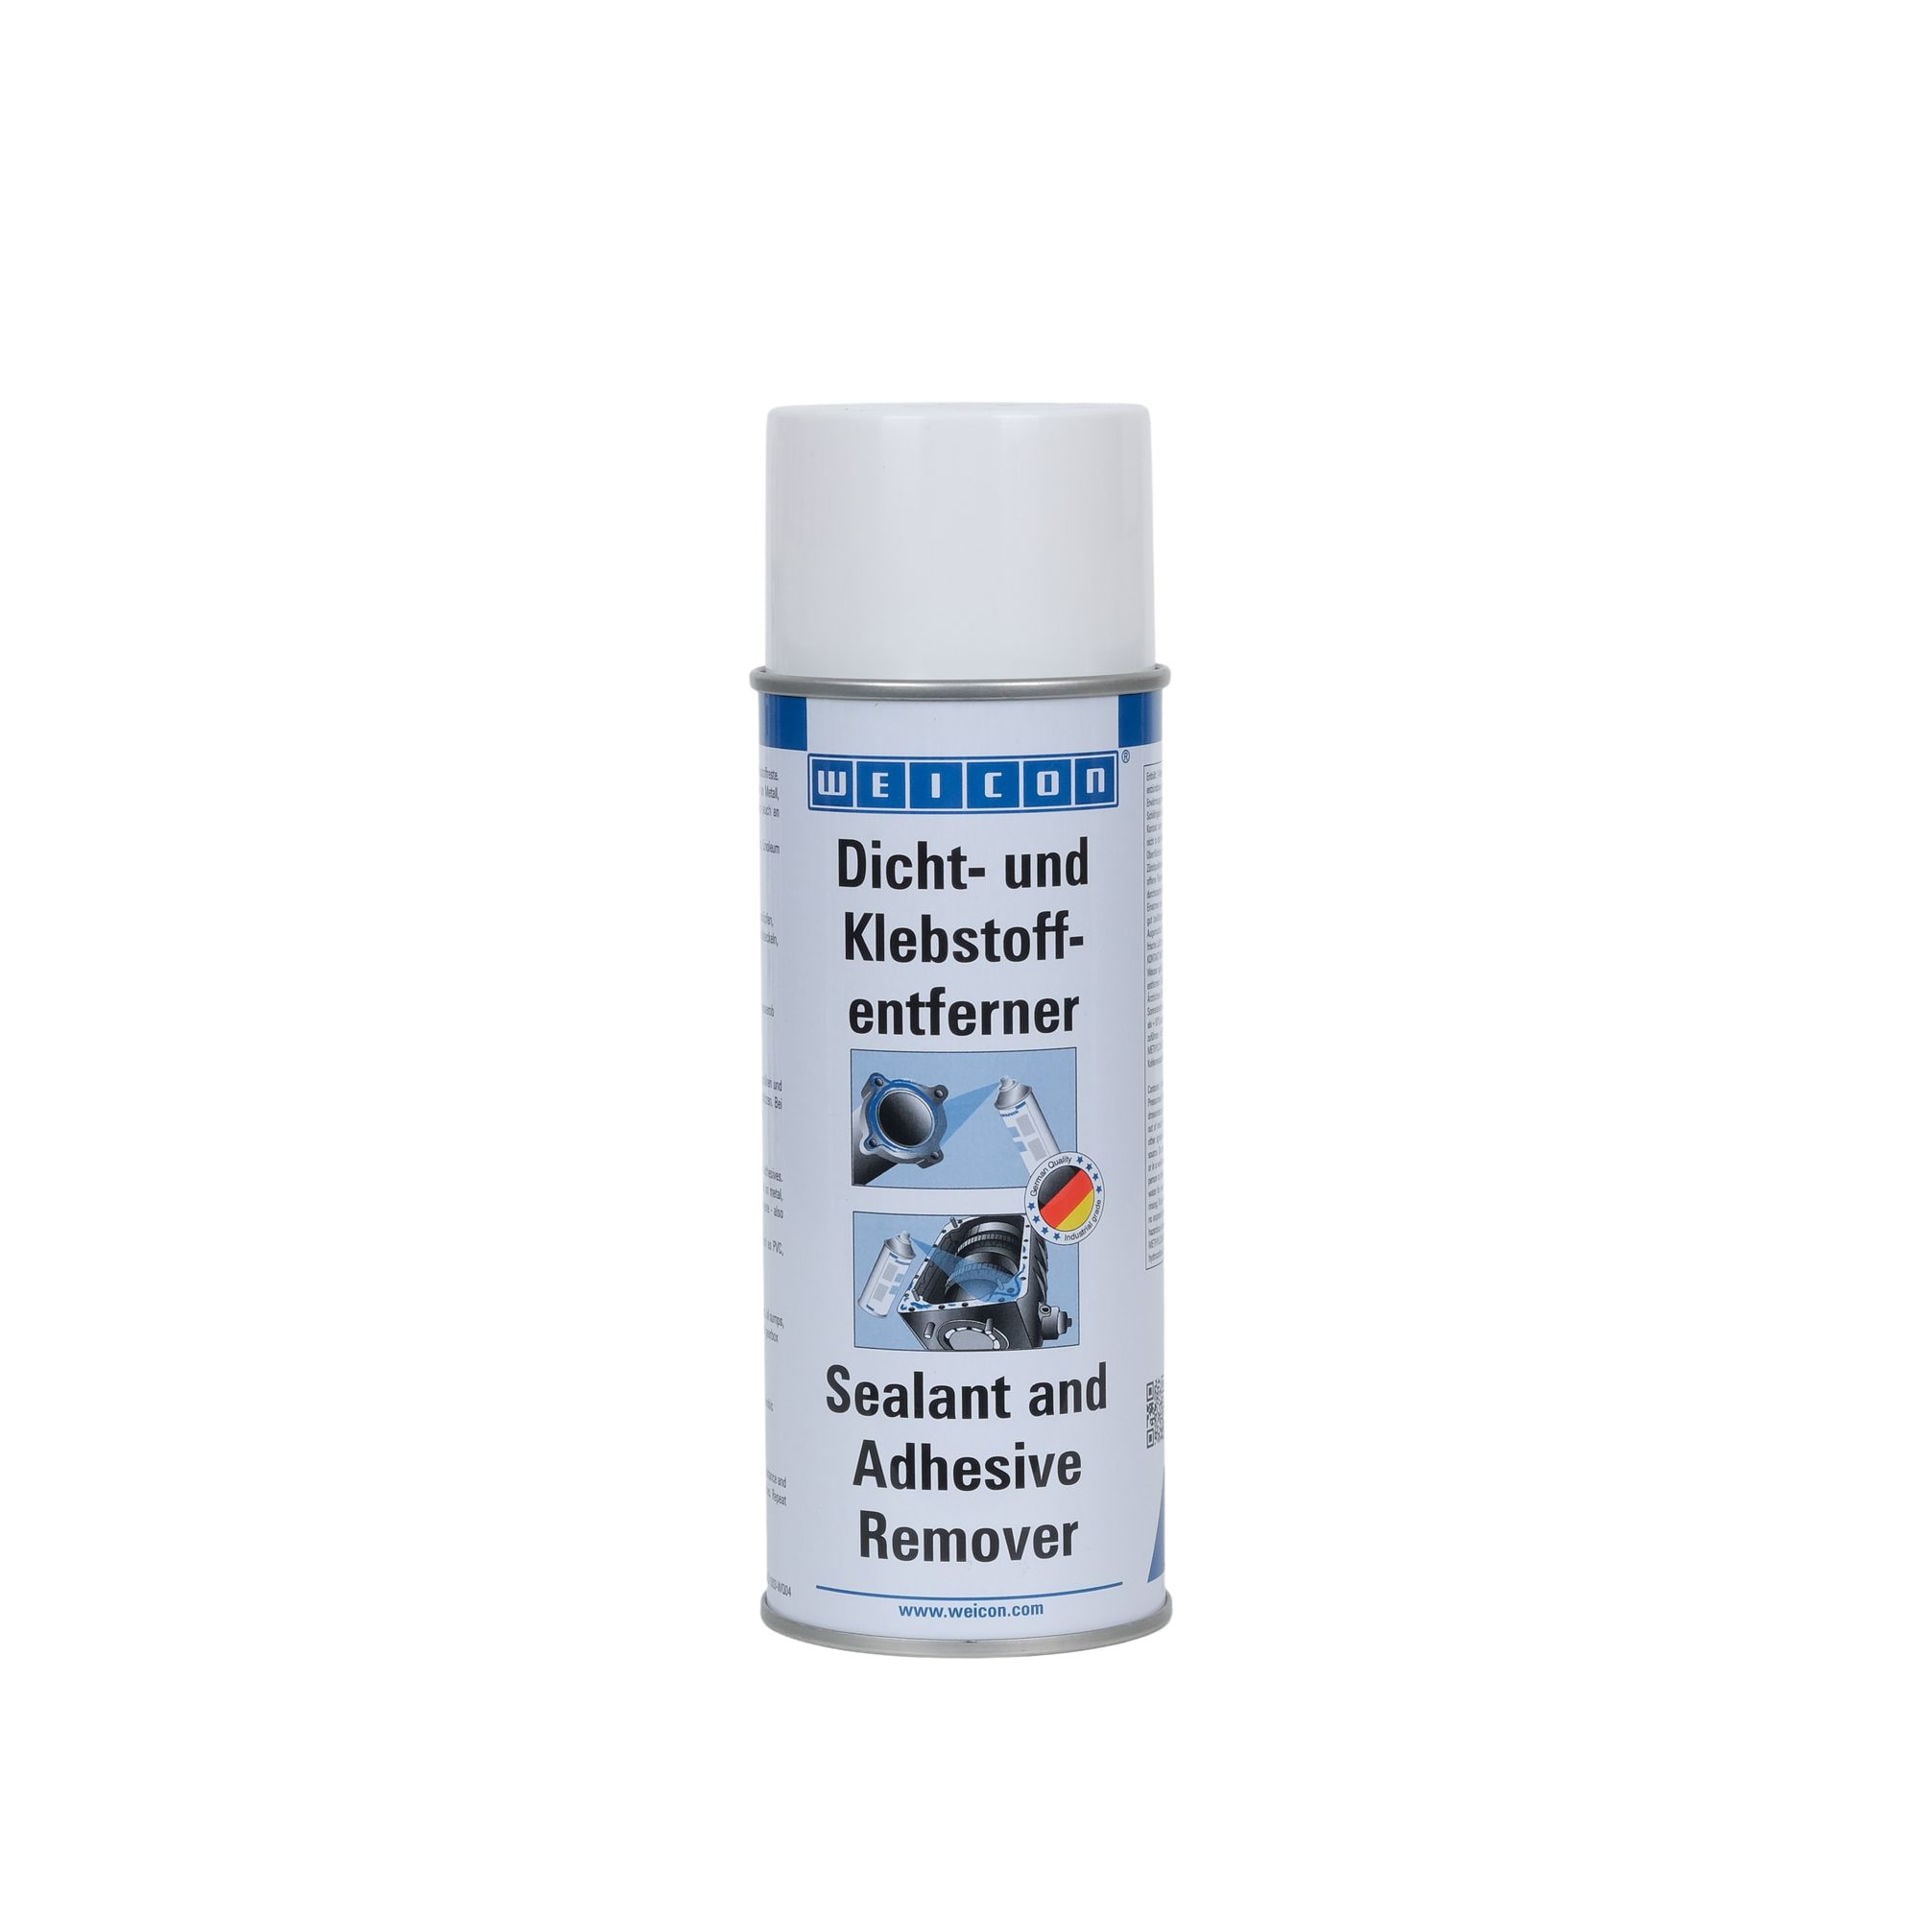 Shop Weicon Sealant and Adhesive Remover, 400 ml, 11202400 | Dragon ...